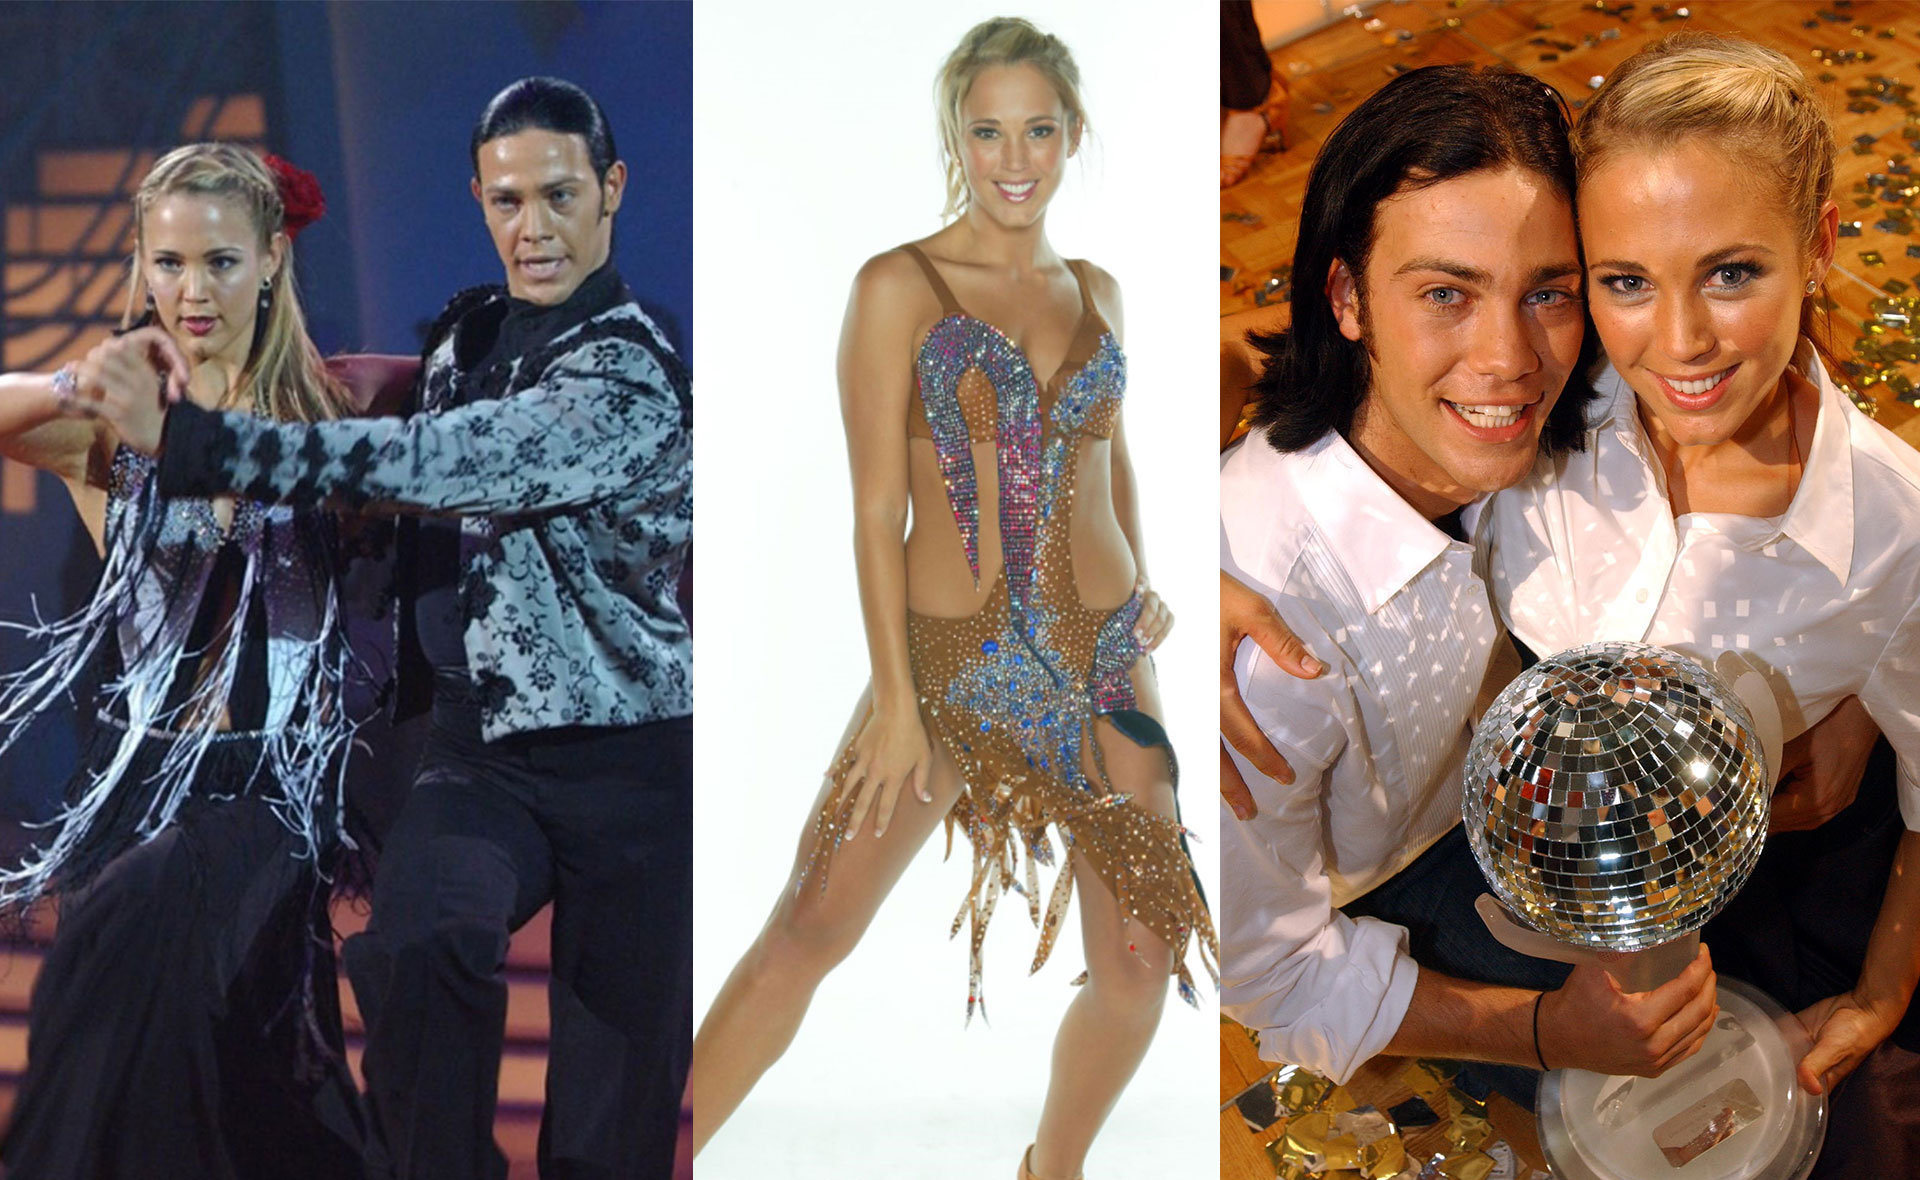 Dancing Queen! A look back at Bec Hewitt’s best moments from her 2004 stint on Dancing With The Stars